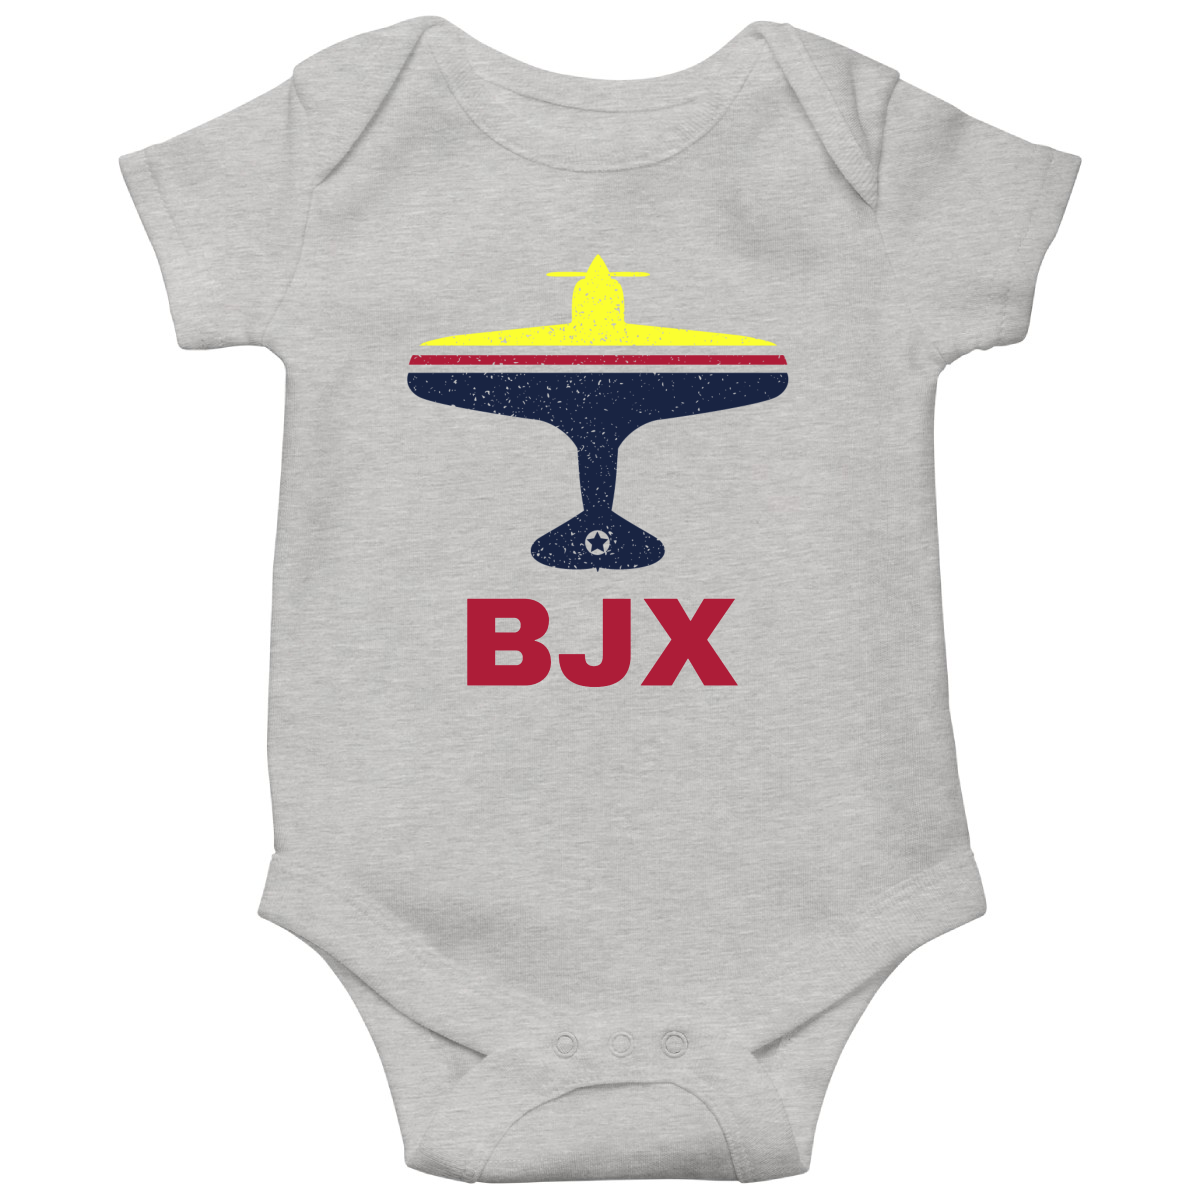 FLY Guanajuato BJX Airport Baby Bodysuits | Gray